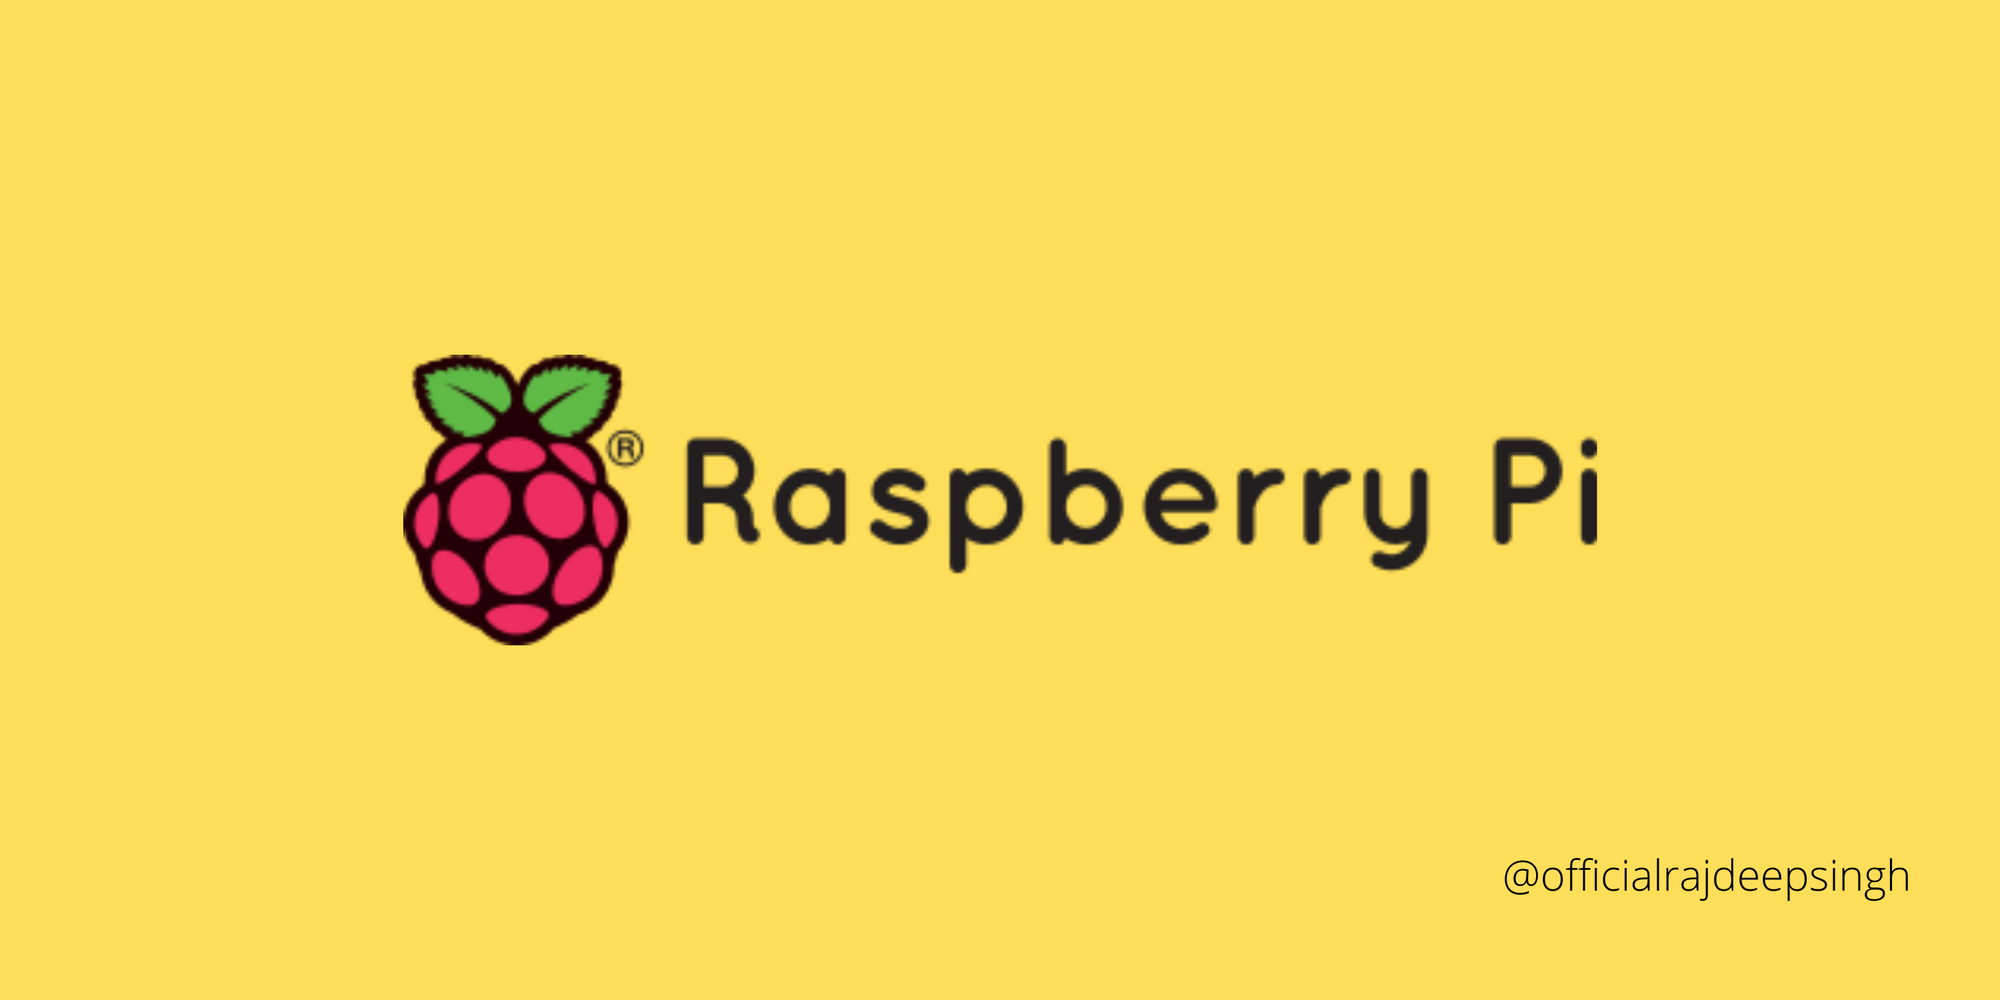 How to check the snap store package available for raspberry pi 4 or not?